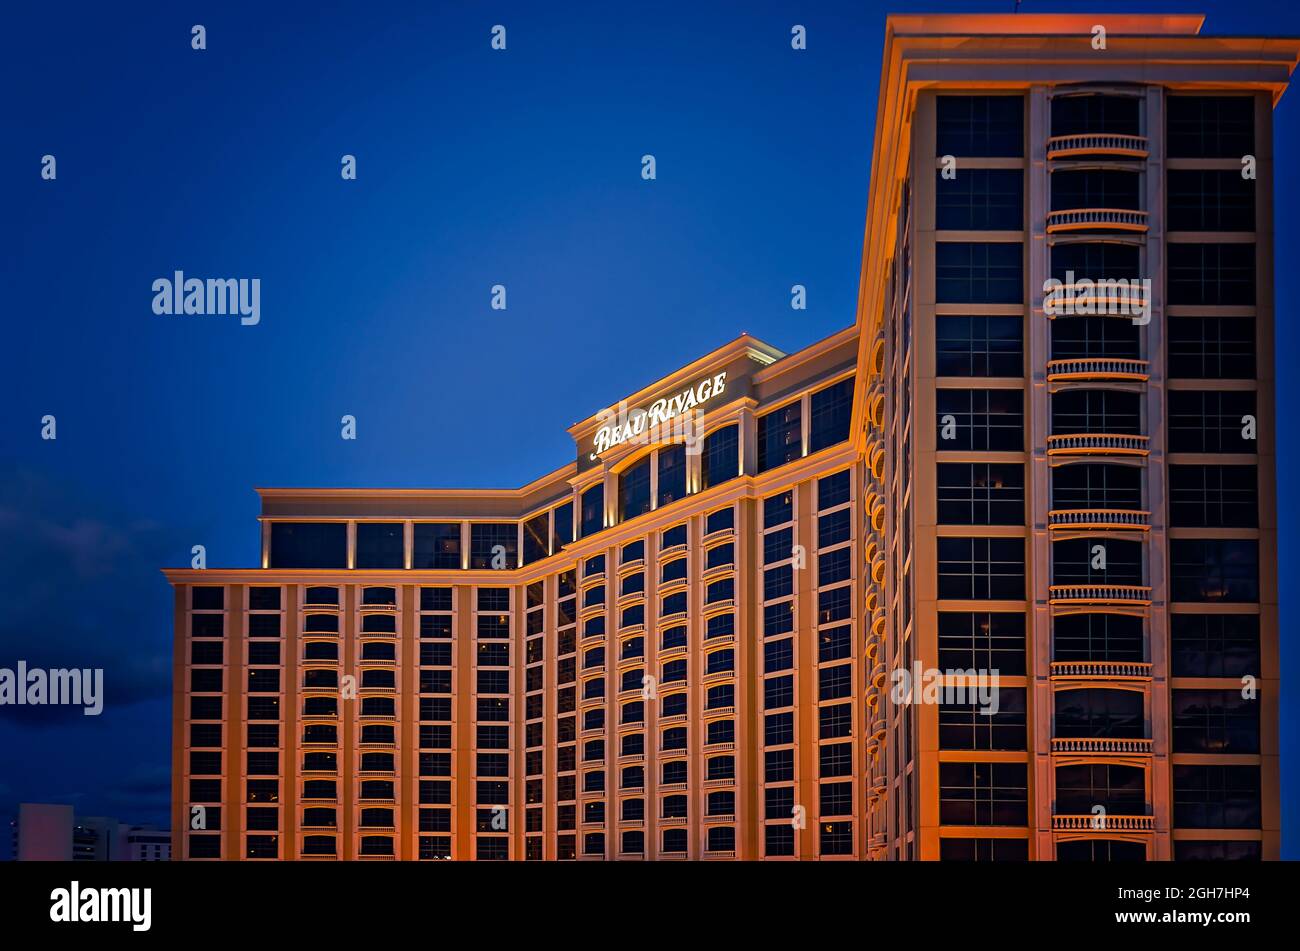 Beau Rivage Casino is pictured, Sept. 5, 2021, in Biloxi, Mississippi. Beau Rivage is owned and operated by MGM Resorts International. Stock Photo